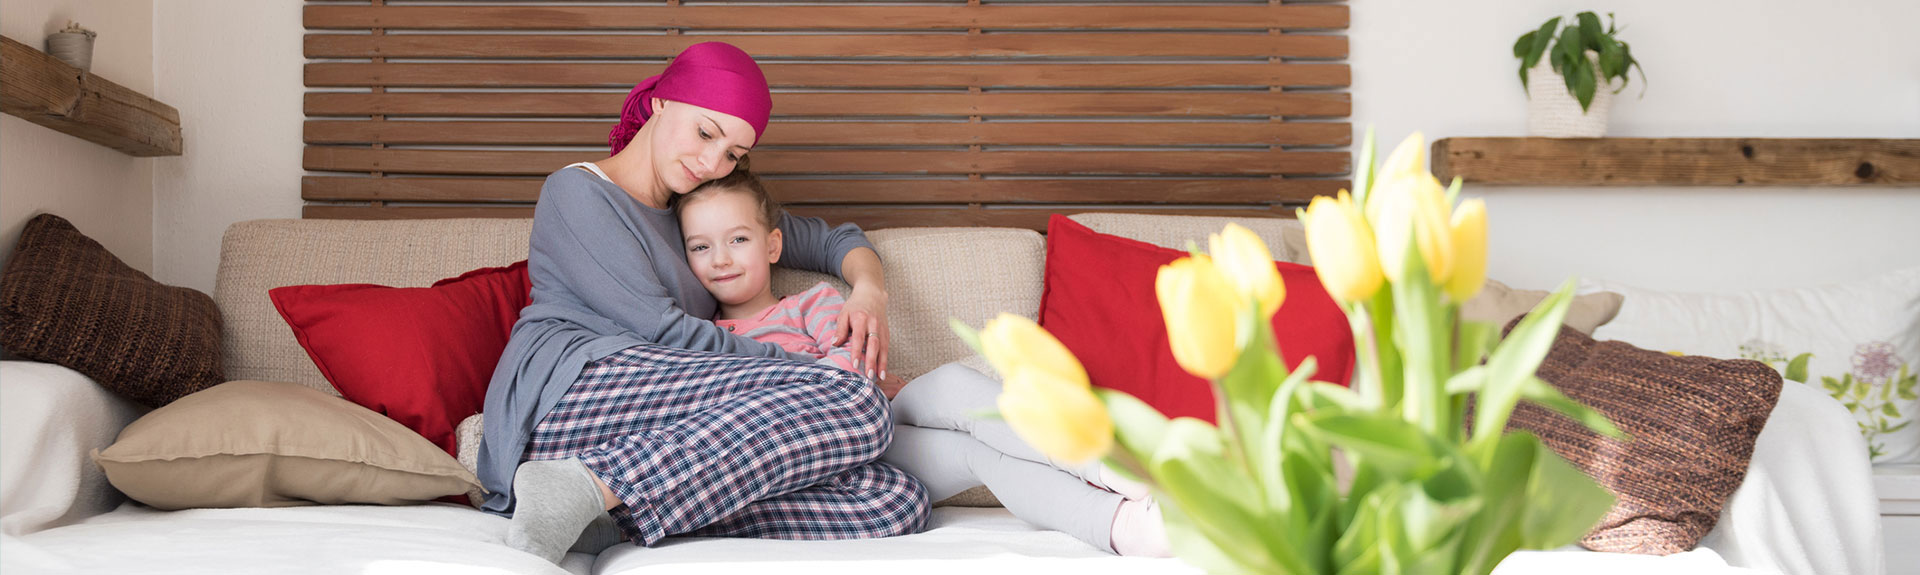 mother with scarf on head cuddling daughter